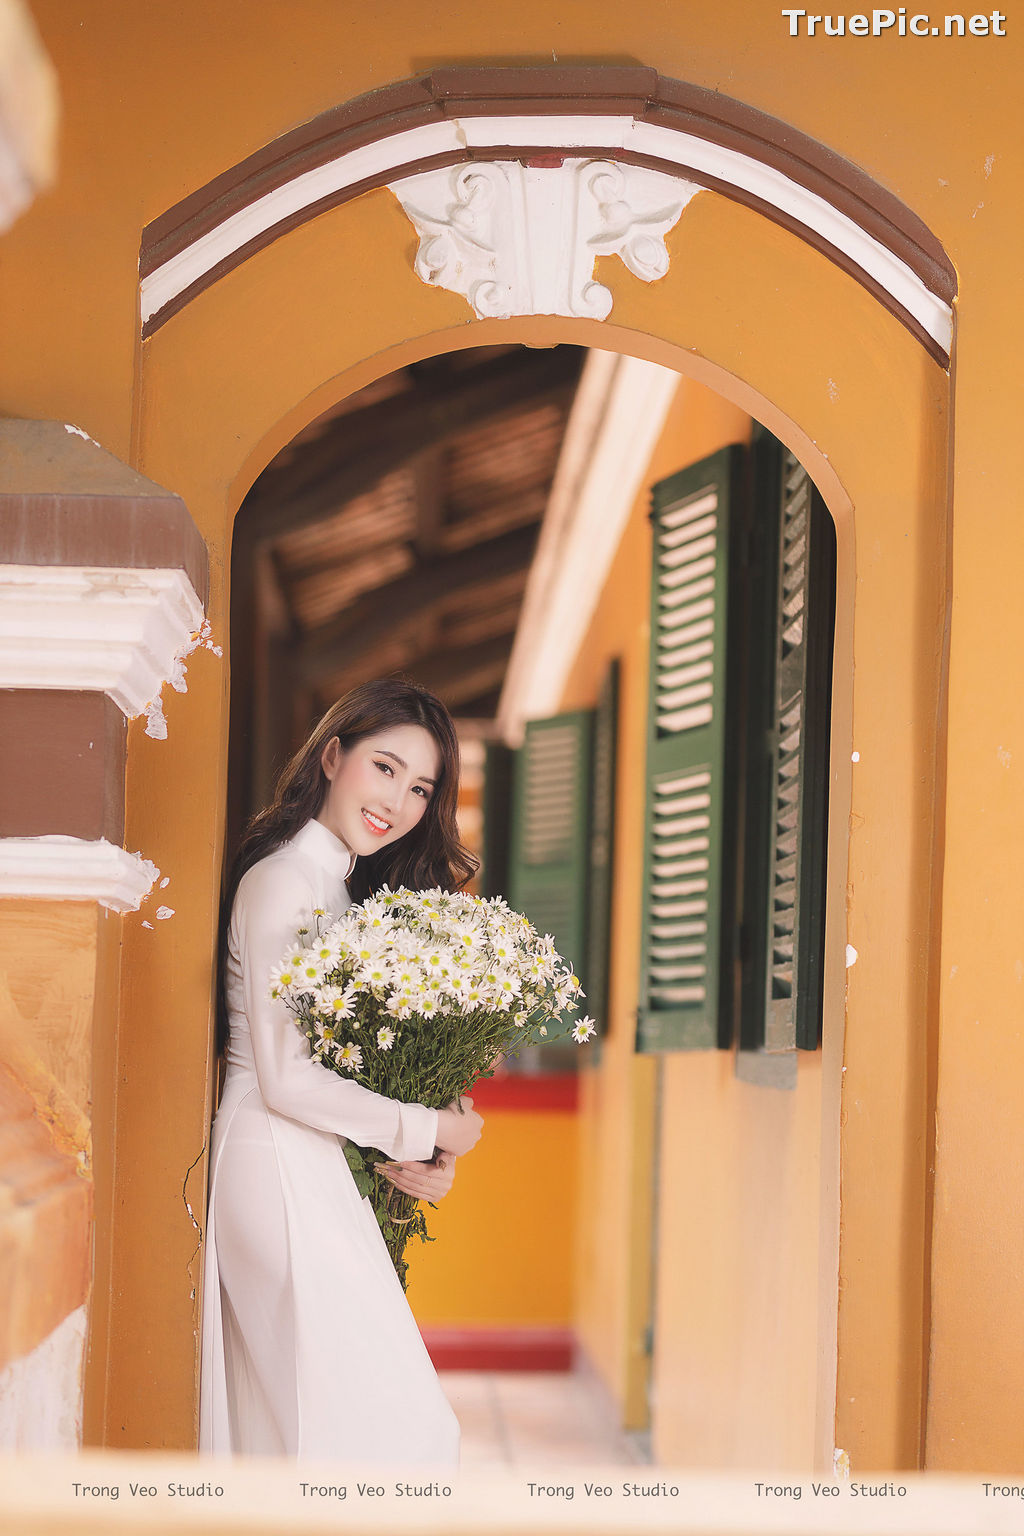 Image The Beauty of Vietnamese Girls with Traditional Dress (Ao Dai) #3 - TruePic.net - Picture-15